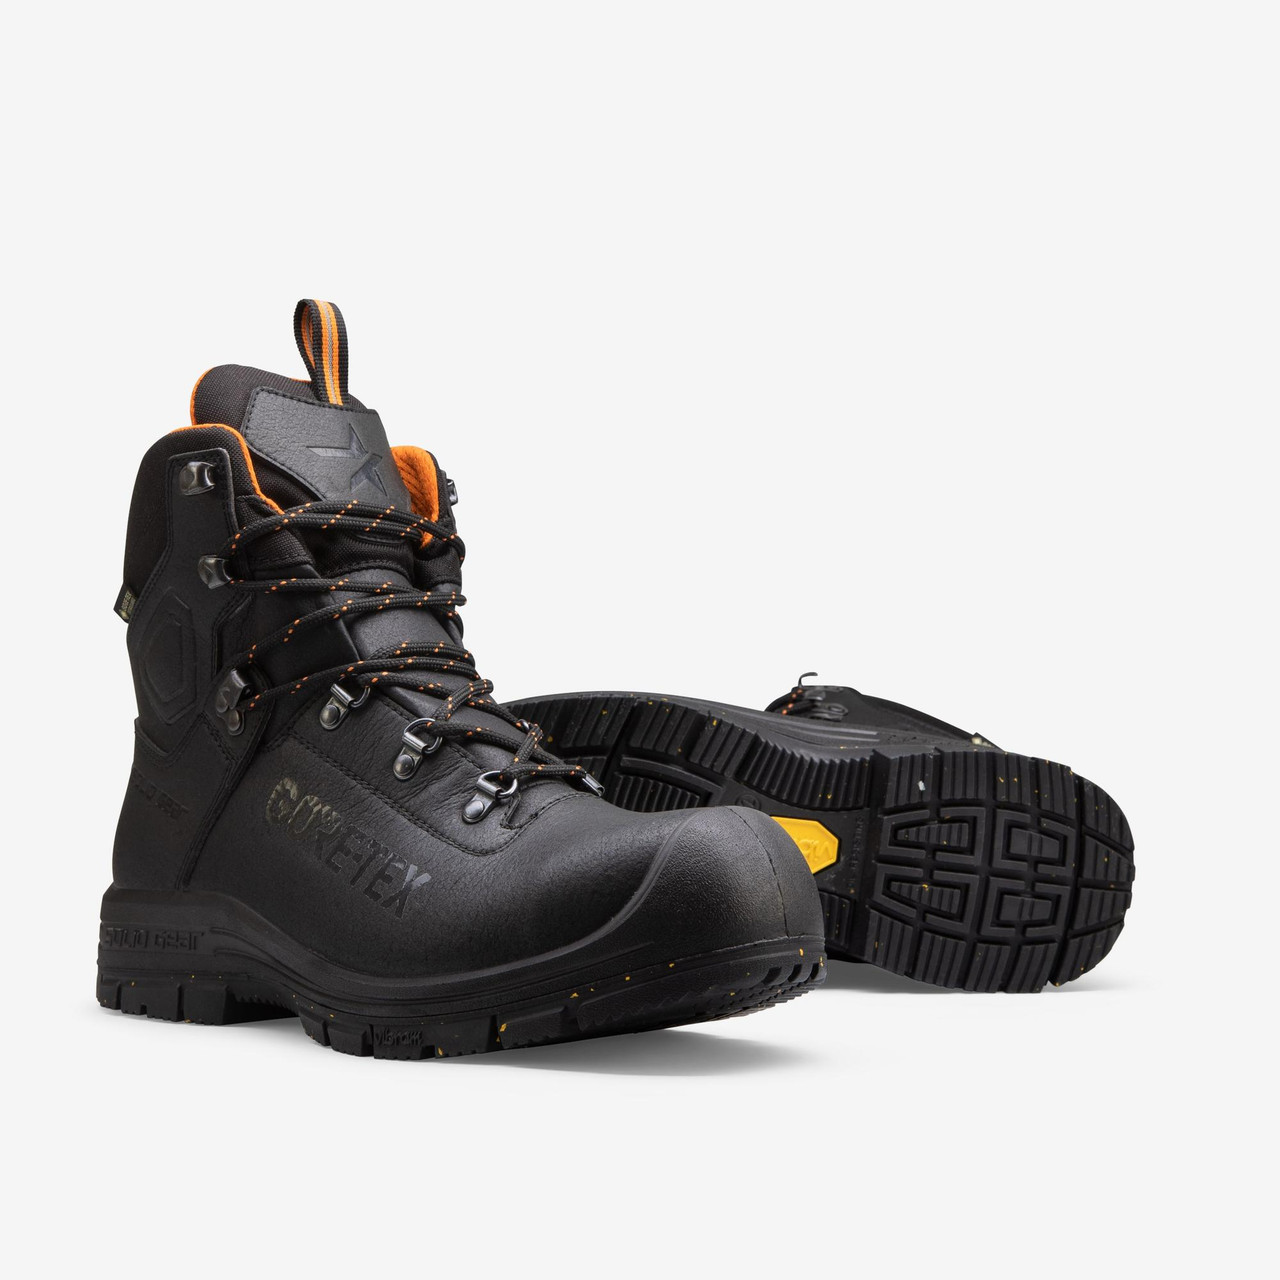 Buy online in Australia and New Zealand a SOLID GEAR Fibreglass Toe Cap Safety Boots for Electricians that perform exceptionally for Warehousing